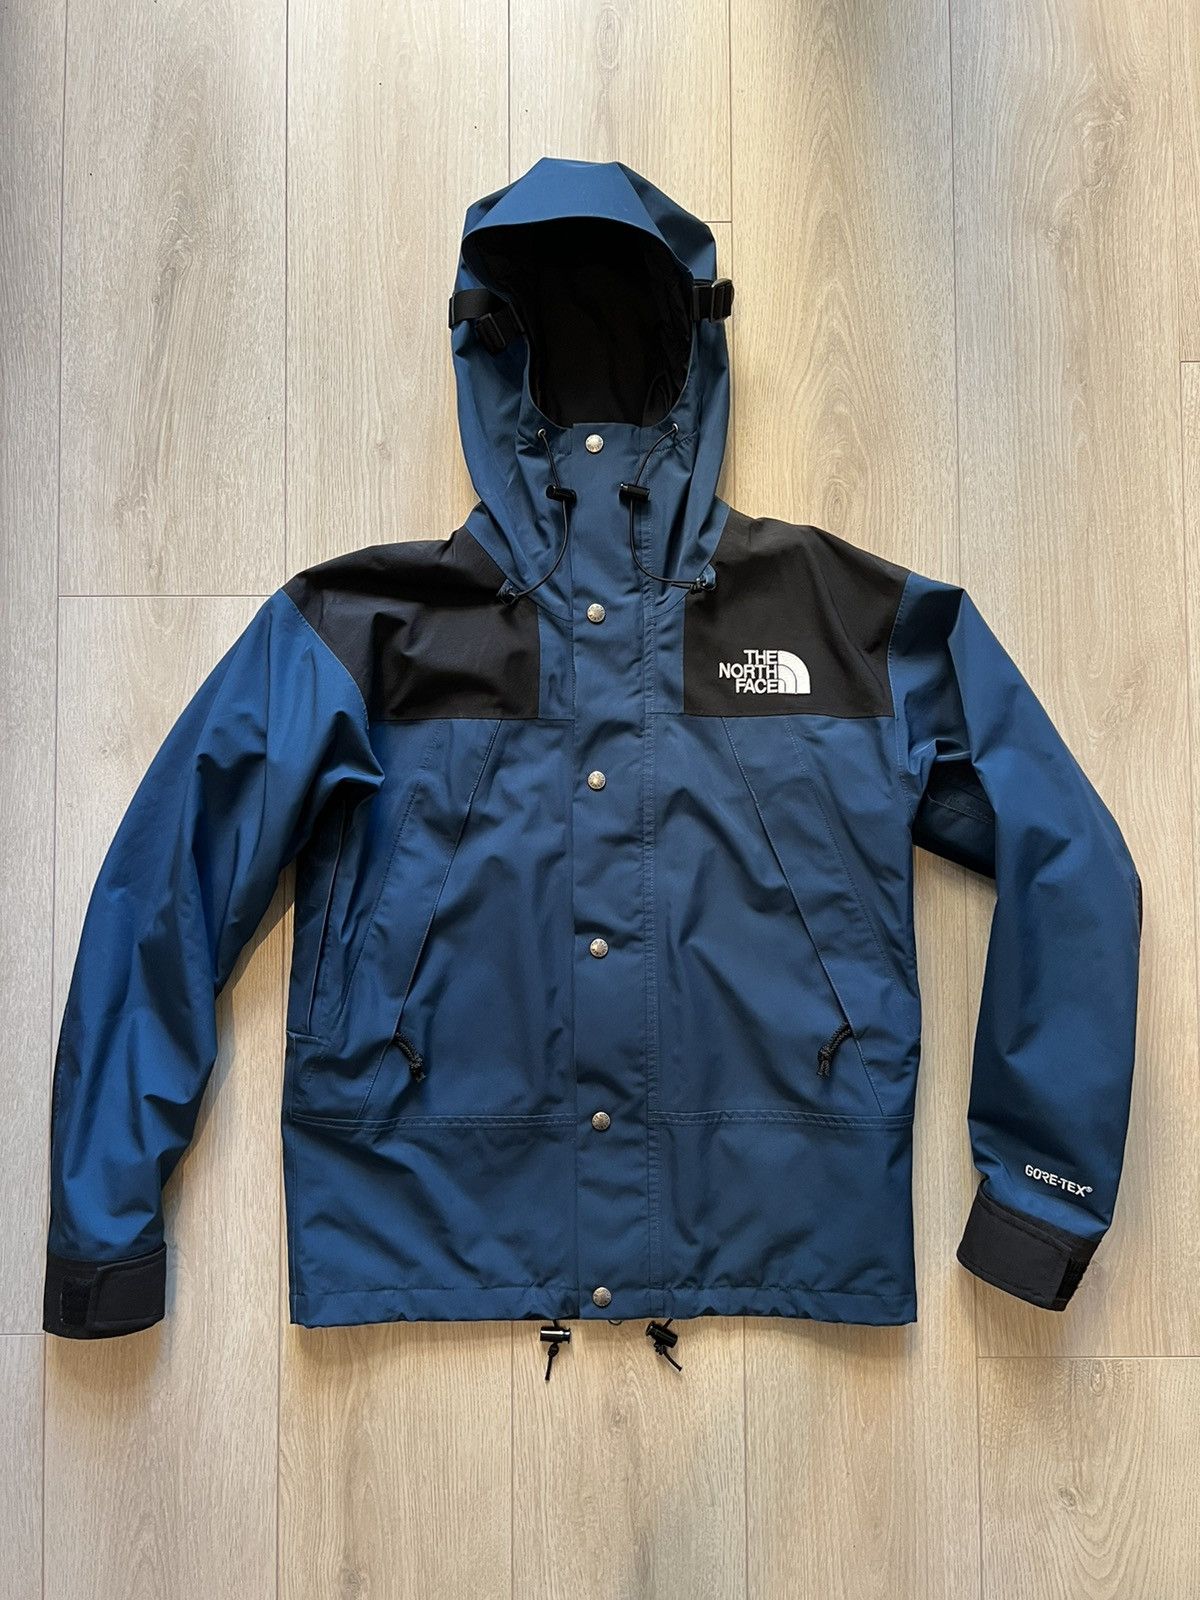 The North Face Iridescent pack 1990 Mountain Jacket | Grailed